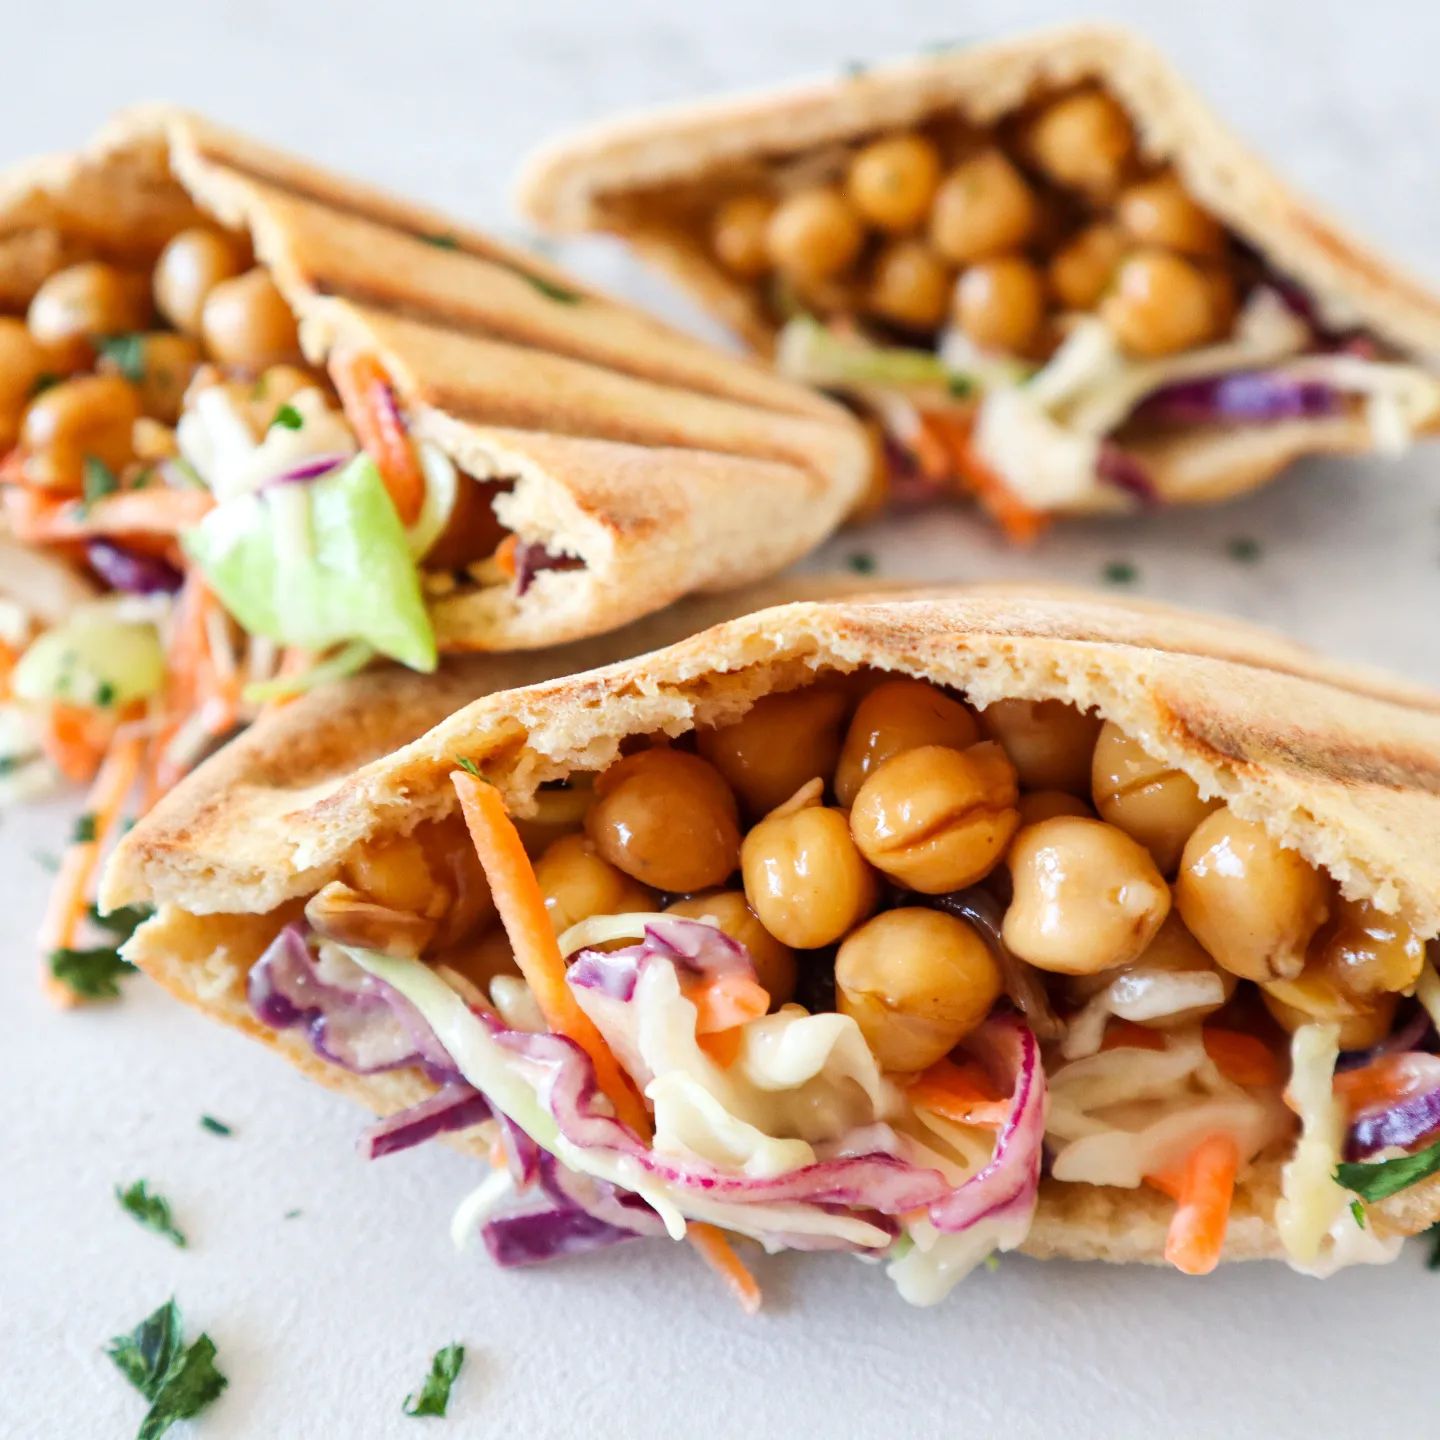 These BBQ chickpea wraps are Mr 6's favourite lunch right now! 

Yep! Mr 6 actually loves something with chickpea in it!!! 

I'll be honest, the chickpeas are probably just a vehicle to get more BBQ sauce in, but I'll still take it! 🤣

This recipe works well for school lunches, too! 😉

BBQ Chickpea Wraps

Prep Time: 10 mins
Total Time: 10 mins
Servings (total): 5

2 ½ cups Coleslaw Mix
2 Tbs 2 tsp Vegan Mayonnaise
2 400g tins Chickpeas
⅓ cup BBQ Sauce
5 whole Wholemeal Wraps

1. Add the coleslaw mix and mayonnaise to a medium bowl. Mis thorugh until the coleslaw is coated.
2. Rinse and drain the chickpeas. Try to remove as much liquid as possible from the chickpeas to stop the wraps from going soggy.
3. Add chickpeas to a medium bowl. Stir through the BBQ sauce until evenly coated.
4. Prepare the wraps (you may need to heat them slightly to make them pliable).
5. Spoon about 1/5 of the coleslaw mix onto the wrap, then top with 1/5 of the chickpeas. Wrap up to enclose the filling.

#vegannutritionist #vegancoaching #veganmom #veganmum #veganparentsofig #healthyvegankids  #vegankidsofig #veganrecipes #vegannutrtitioncoach #vegankidsnutrition #veganparentsaustralia #vegan #veganlunch #veganlunchbox #veganlunchideas #vegannutfree #vegankids #veganworklunch #plantbasedkids #plantbasedlunch